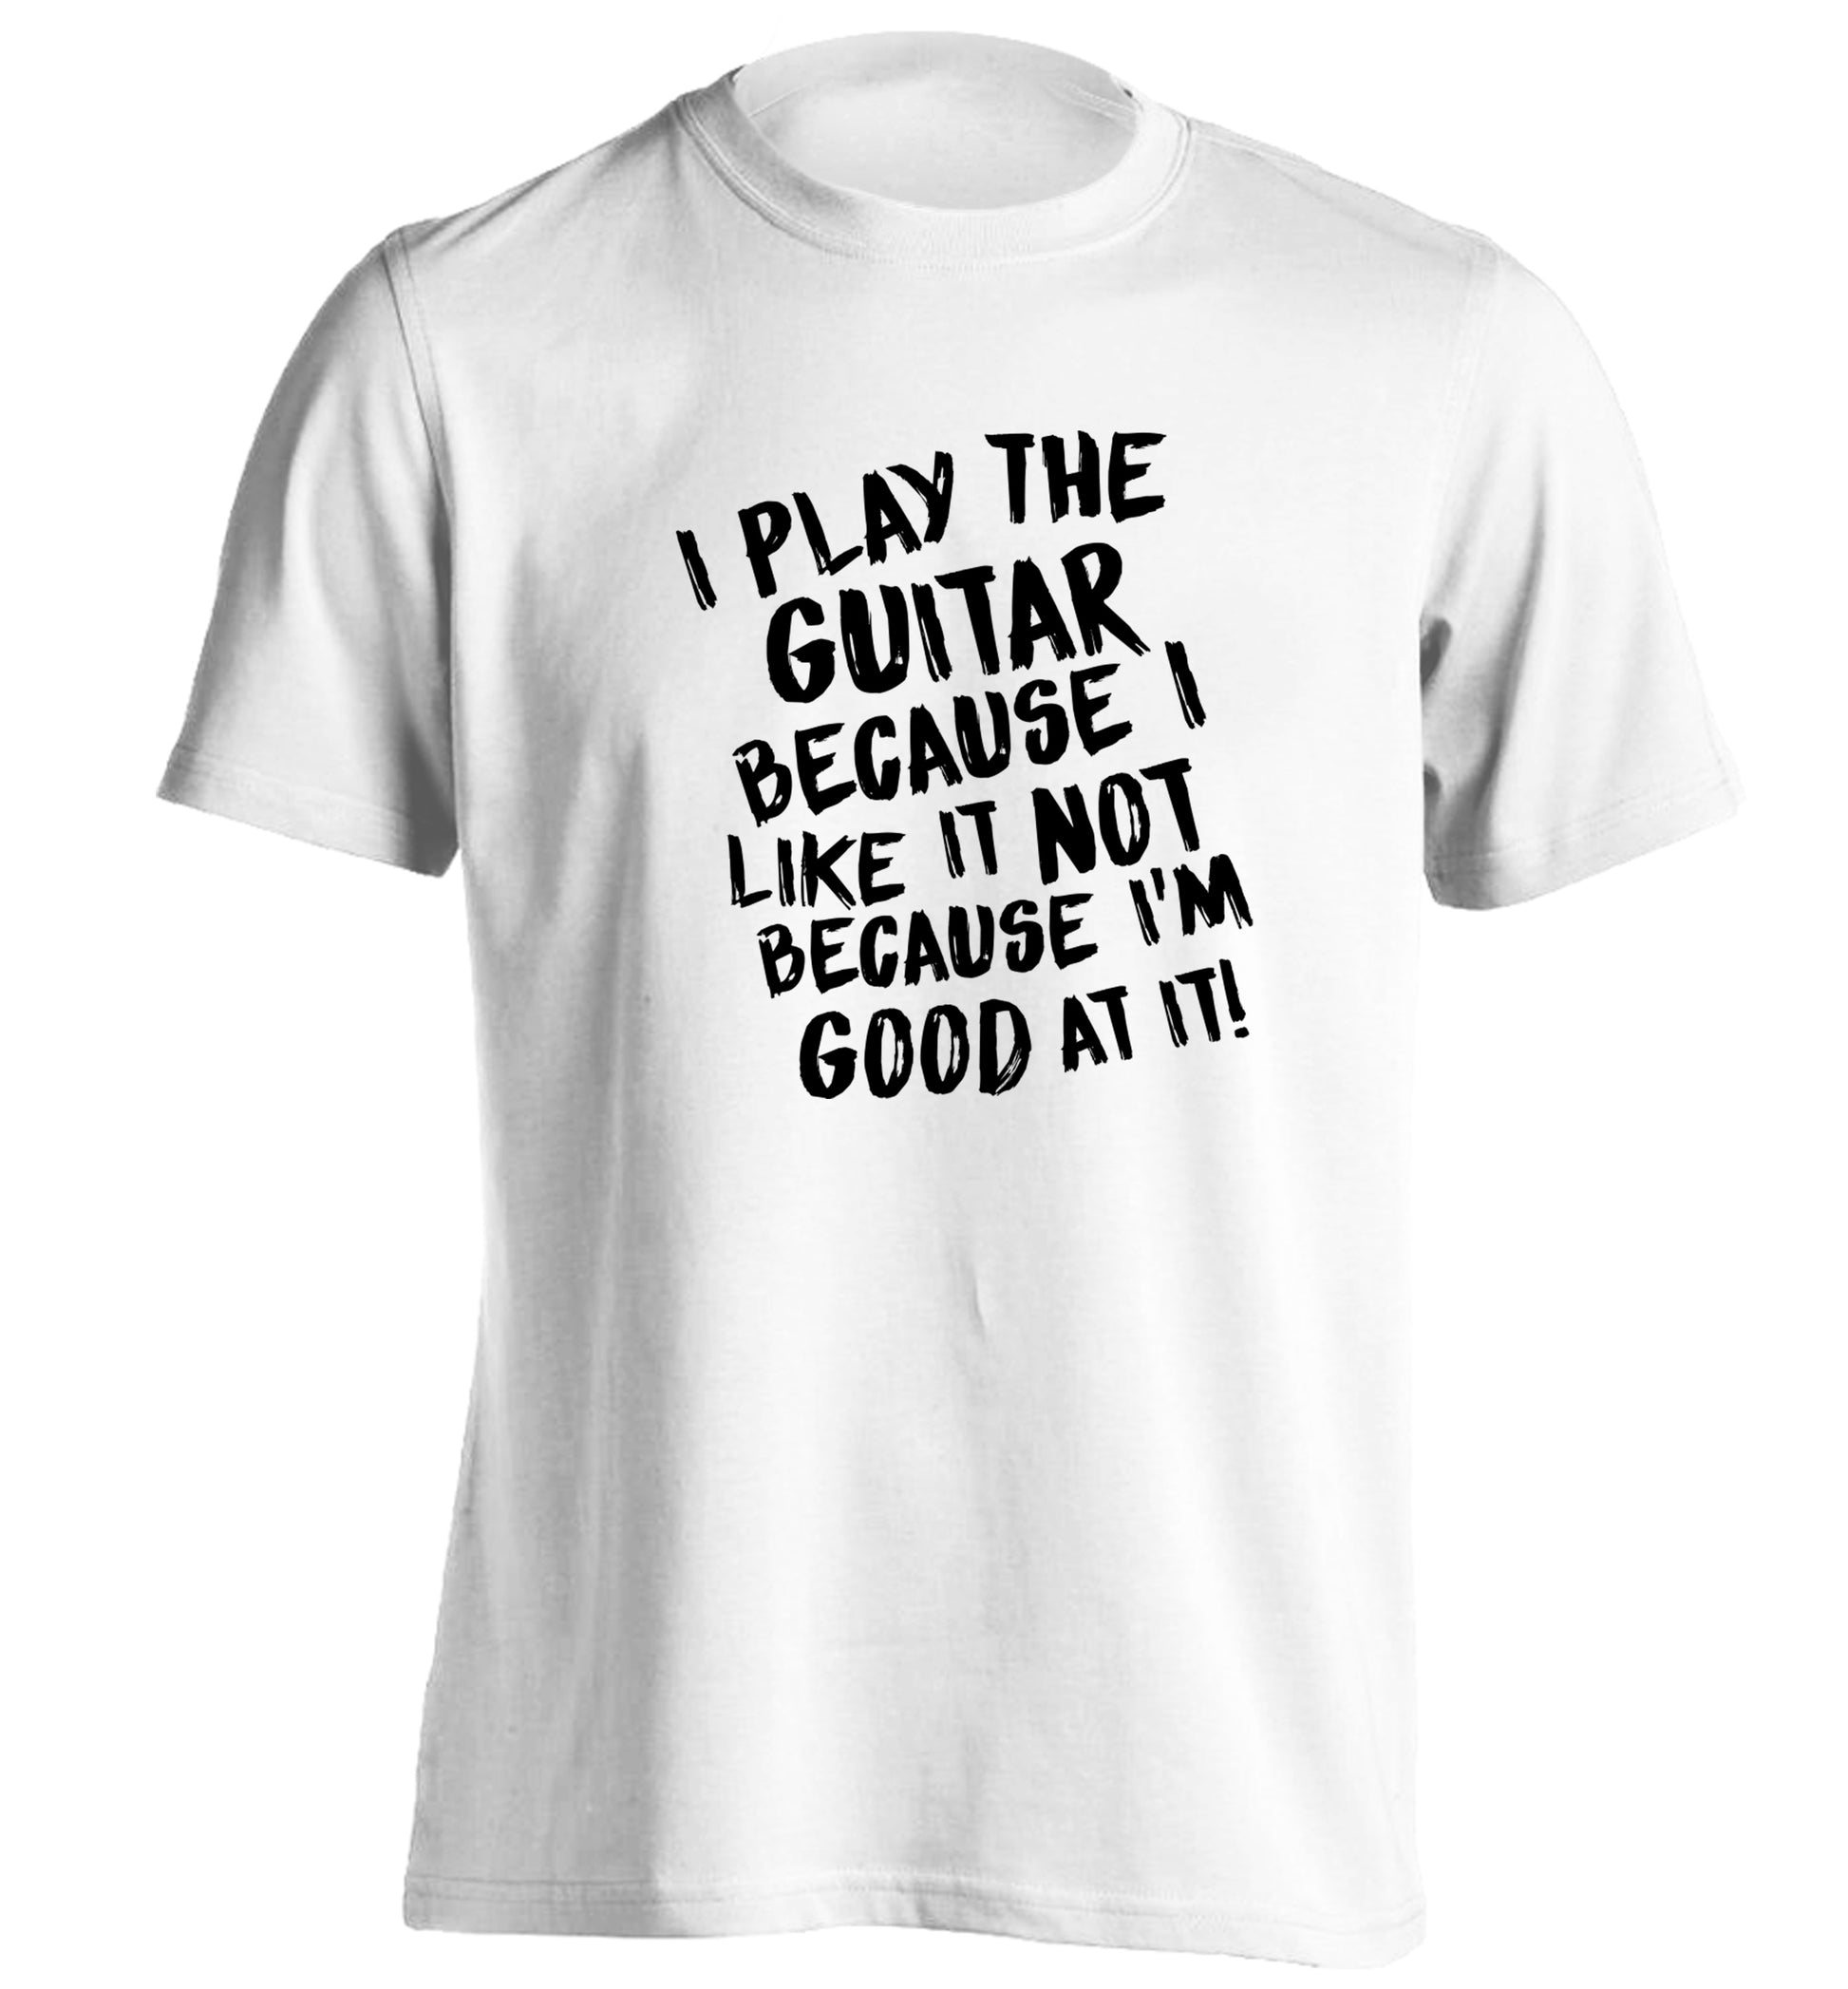 I play the guitar because I like it not because I'm good at it adults unisex white Tshirt 2XL